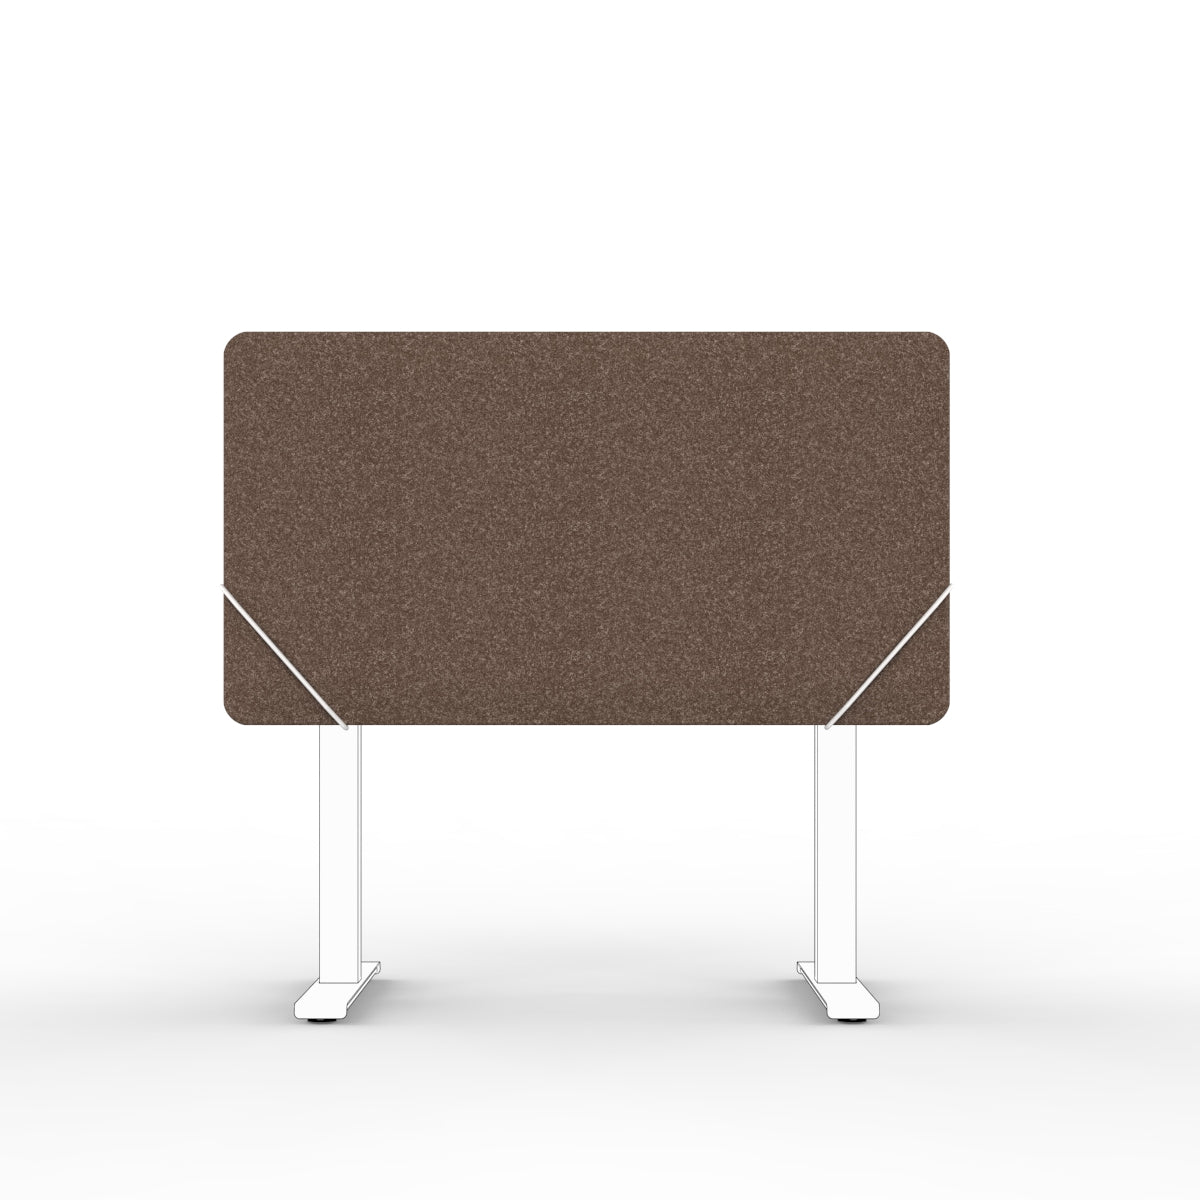 Table screen sound absorber in brown wool felt with white slide on table mounts. 